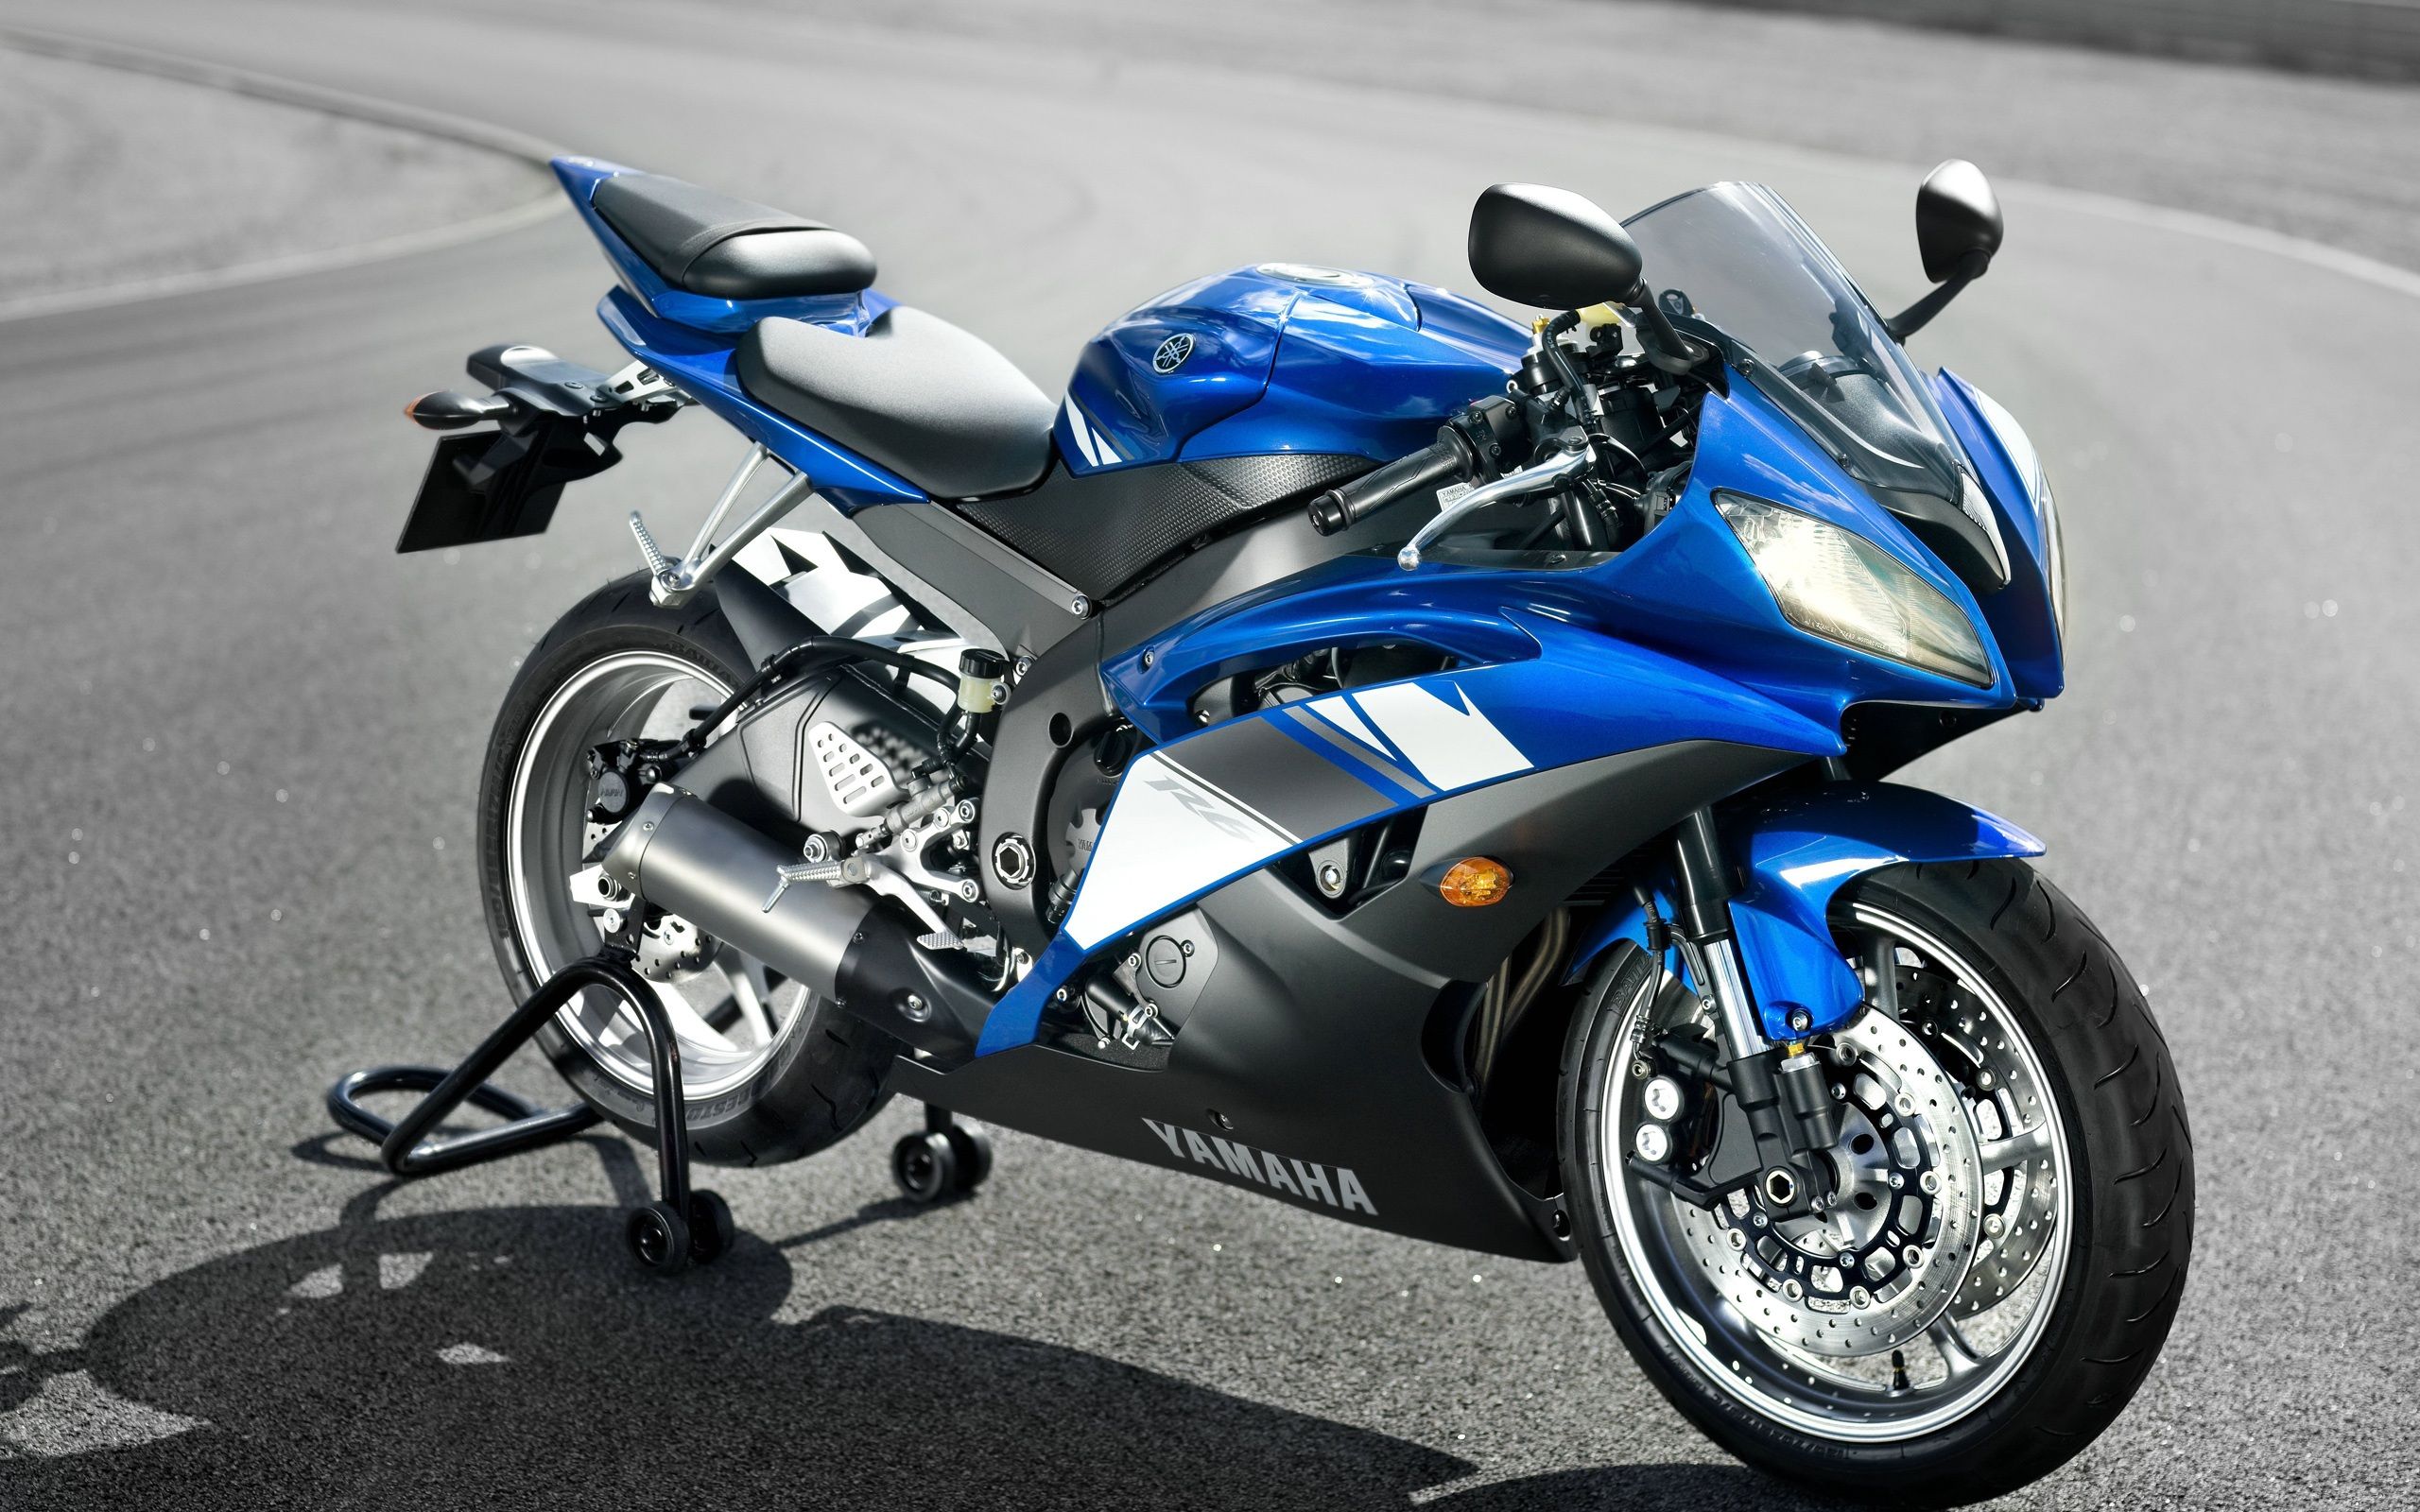 20 Things You Didn't Know About Yamaha Motorcycles